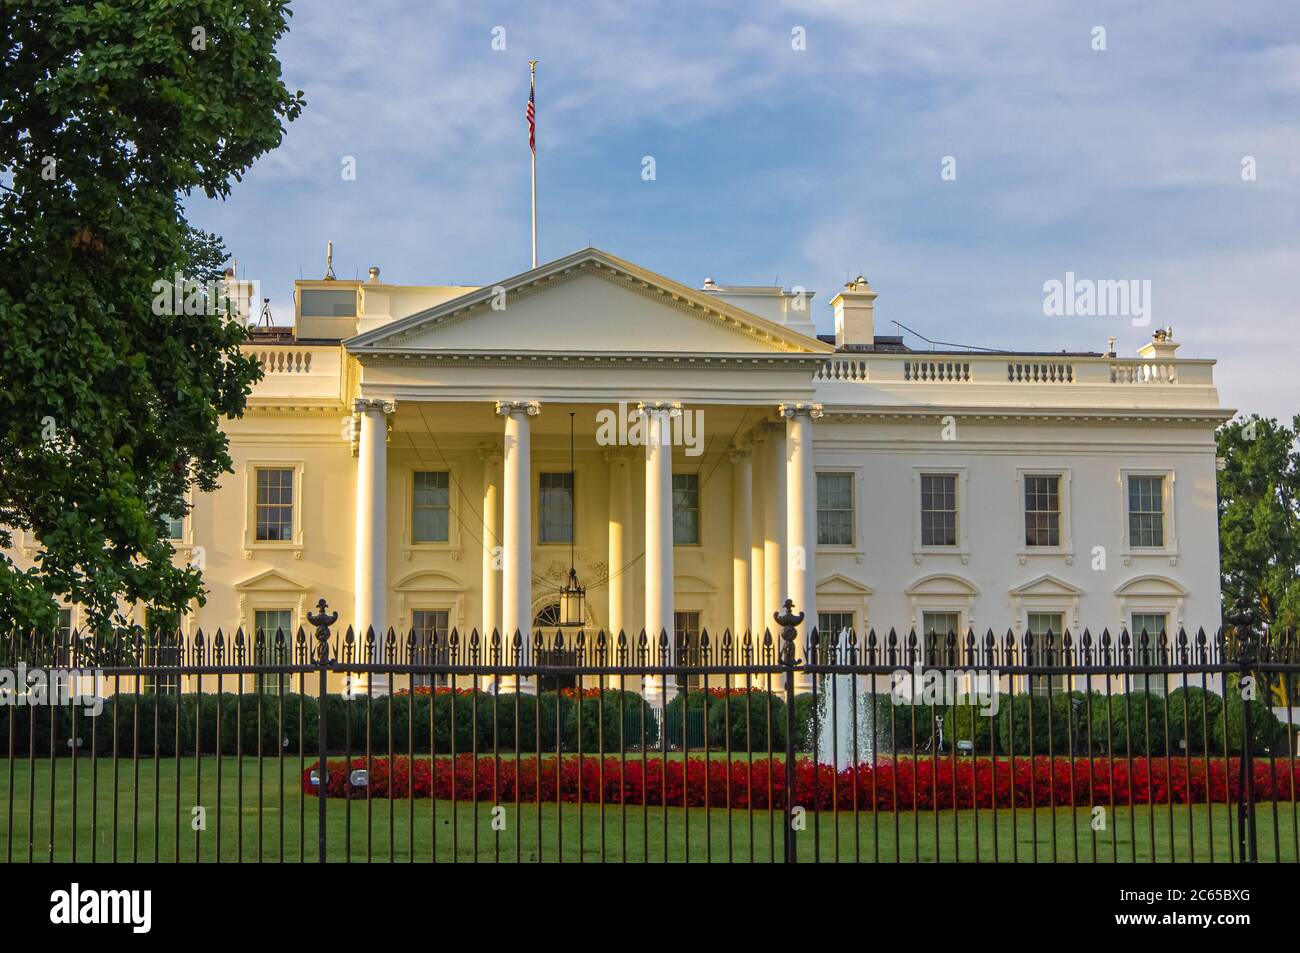 Sunrise Light On The Front Entrance Of White House Presidential Residence And Executive Office Of The President Of The United States Of America In Wa Stock Photo Alamy